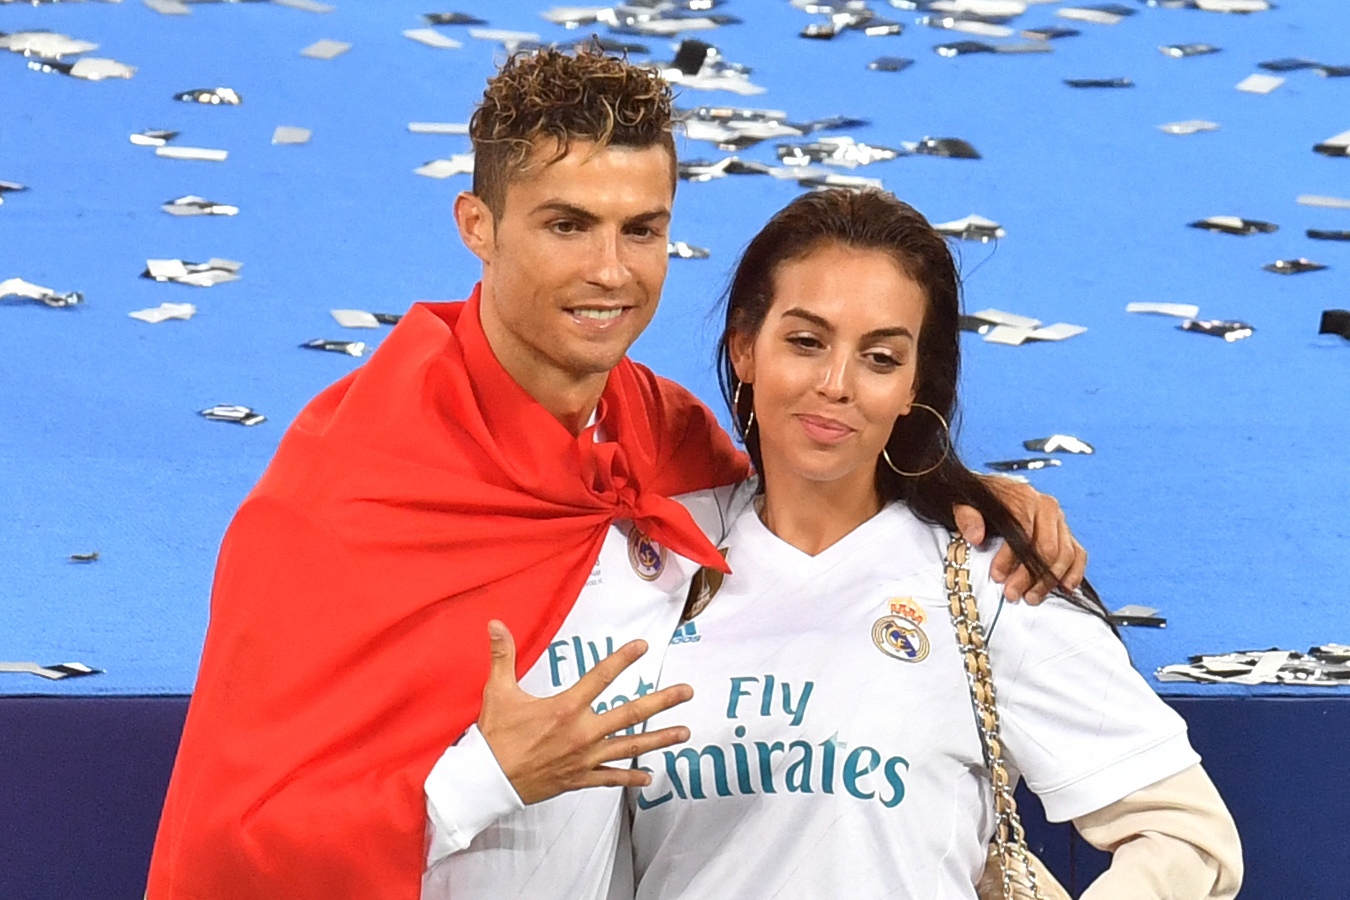 Cristiano Ronaldo poses with his girlfriend Georgina Rodriguez after his team won the UEFA Champions League final football match between Liverpool and Real Madrid at the Olympic Stadium in Kiev, Ukraine on May 26, 2018. | Source: Getty Images